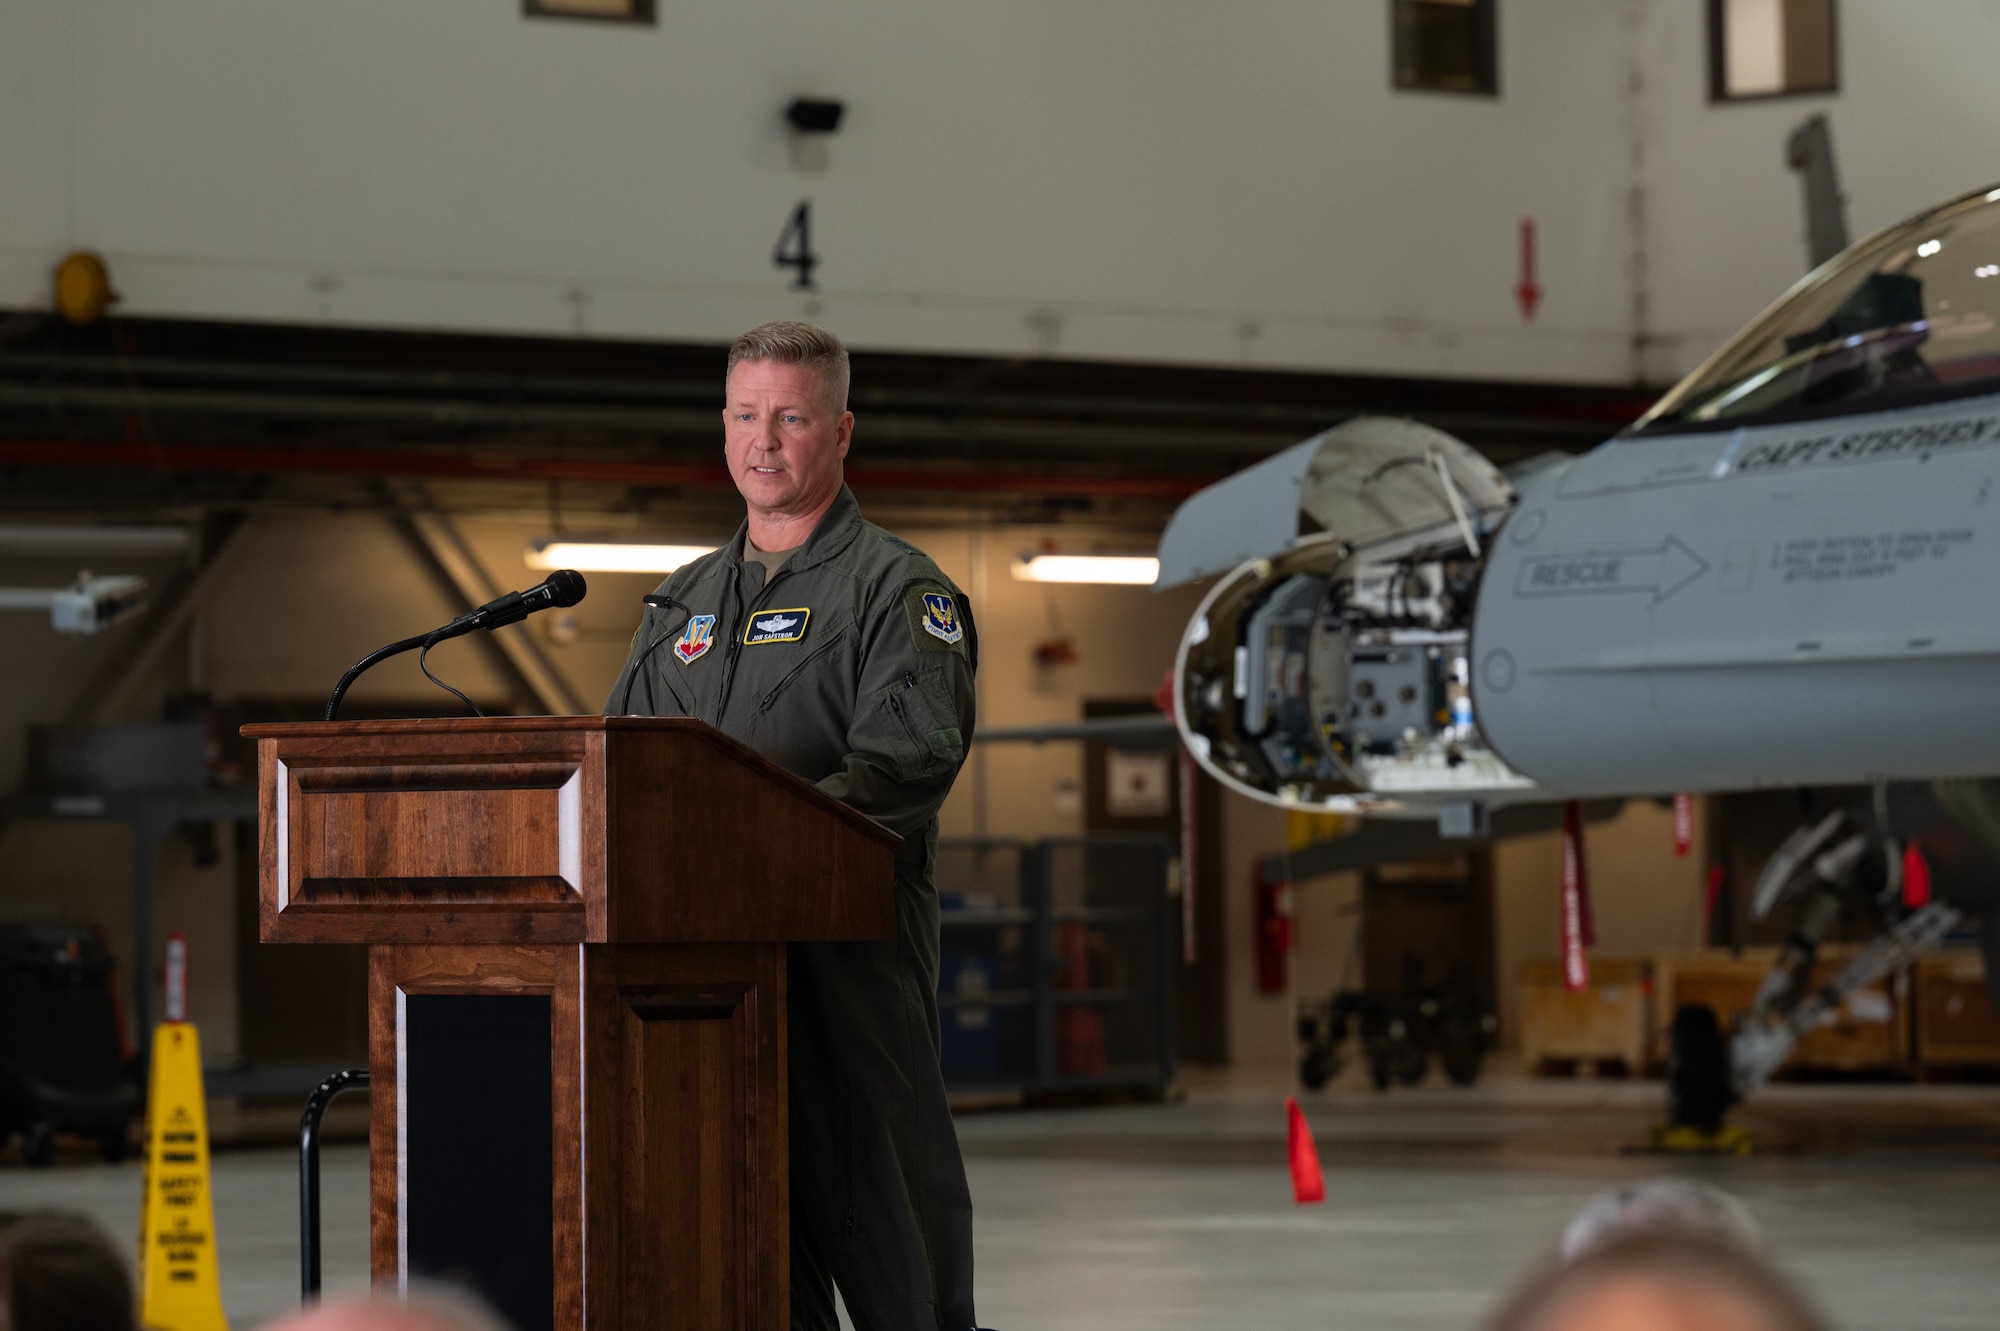 U.S. Air Force Maj. Gen. Jon S. Safstrom, Air National Guard (ANG) assistant to the commander, Continental United States North American Aerospace Defense Command Region and First Air Force, speaks during a commemoration ceremony for the Active Electronically Scanned Array (AESA) radar now equipped on F-16 Fighting Falcon aircraft assigned to the District of Columbia National Guard on Joint Base Andrews, Maryland, June 9, 2022.